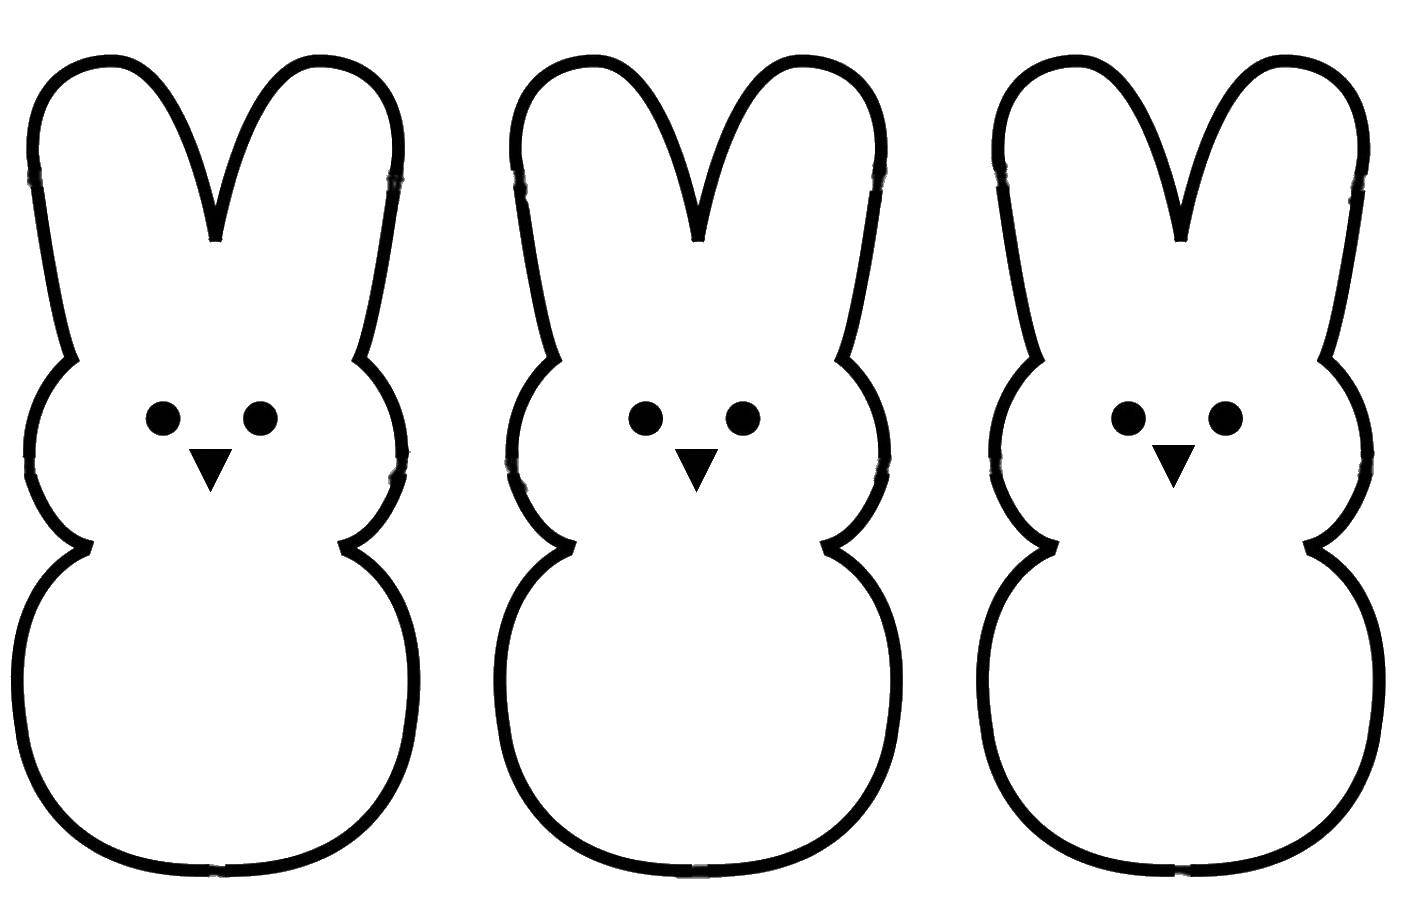 Coloring Bunnies. Category wild animals. Tags:  world.